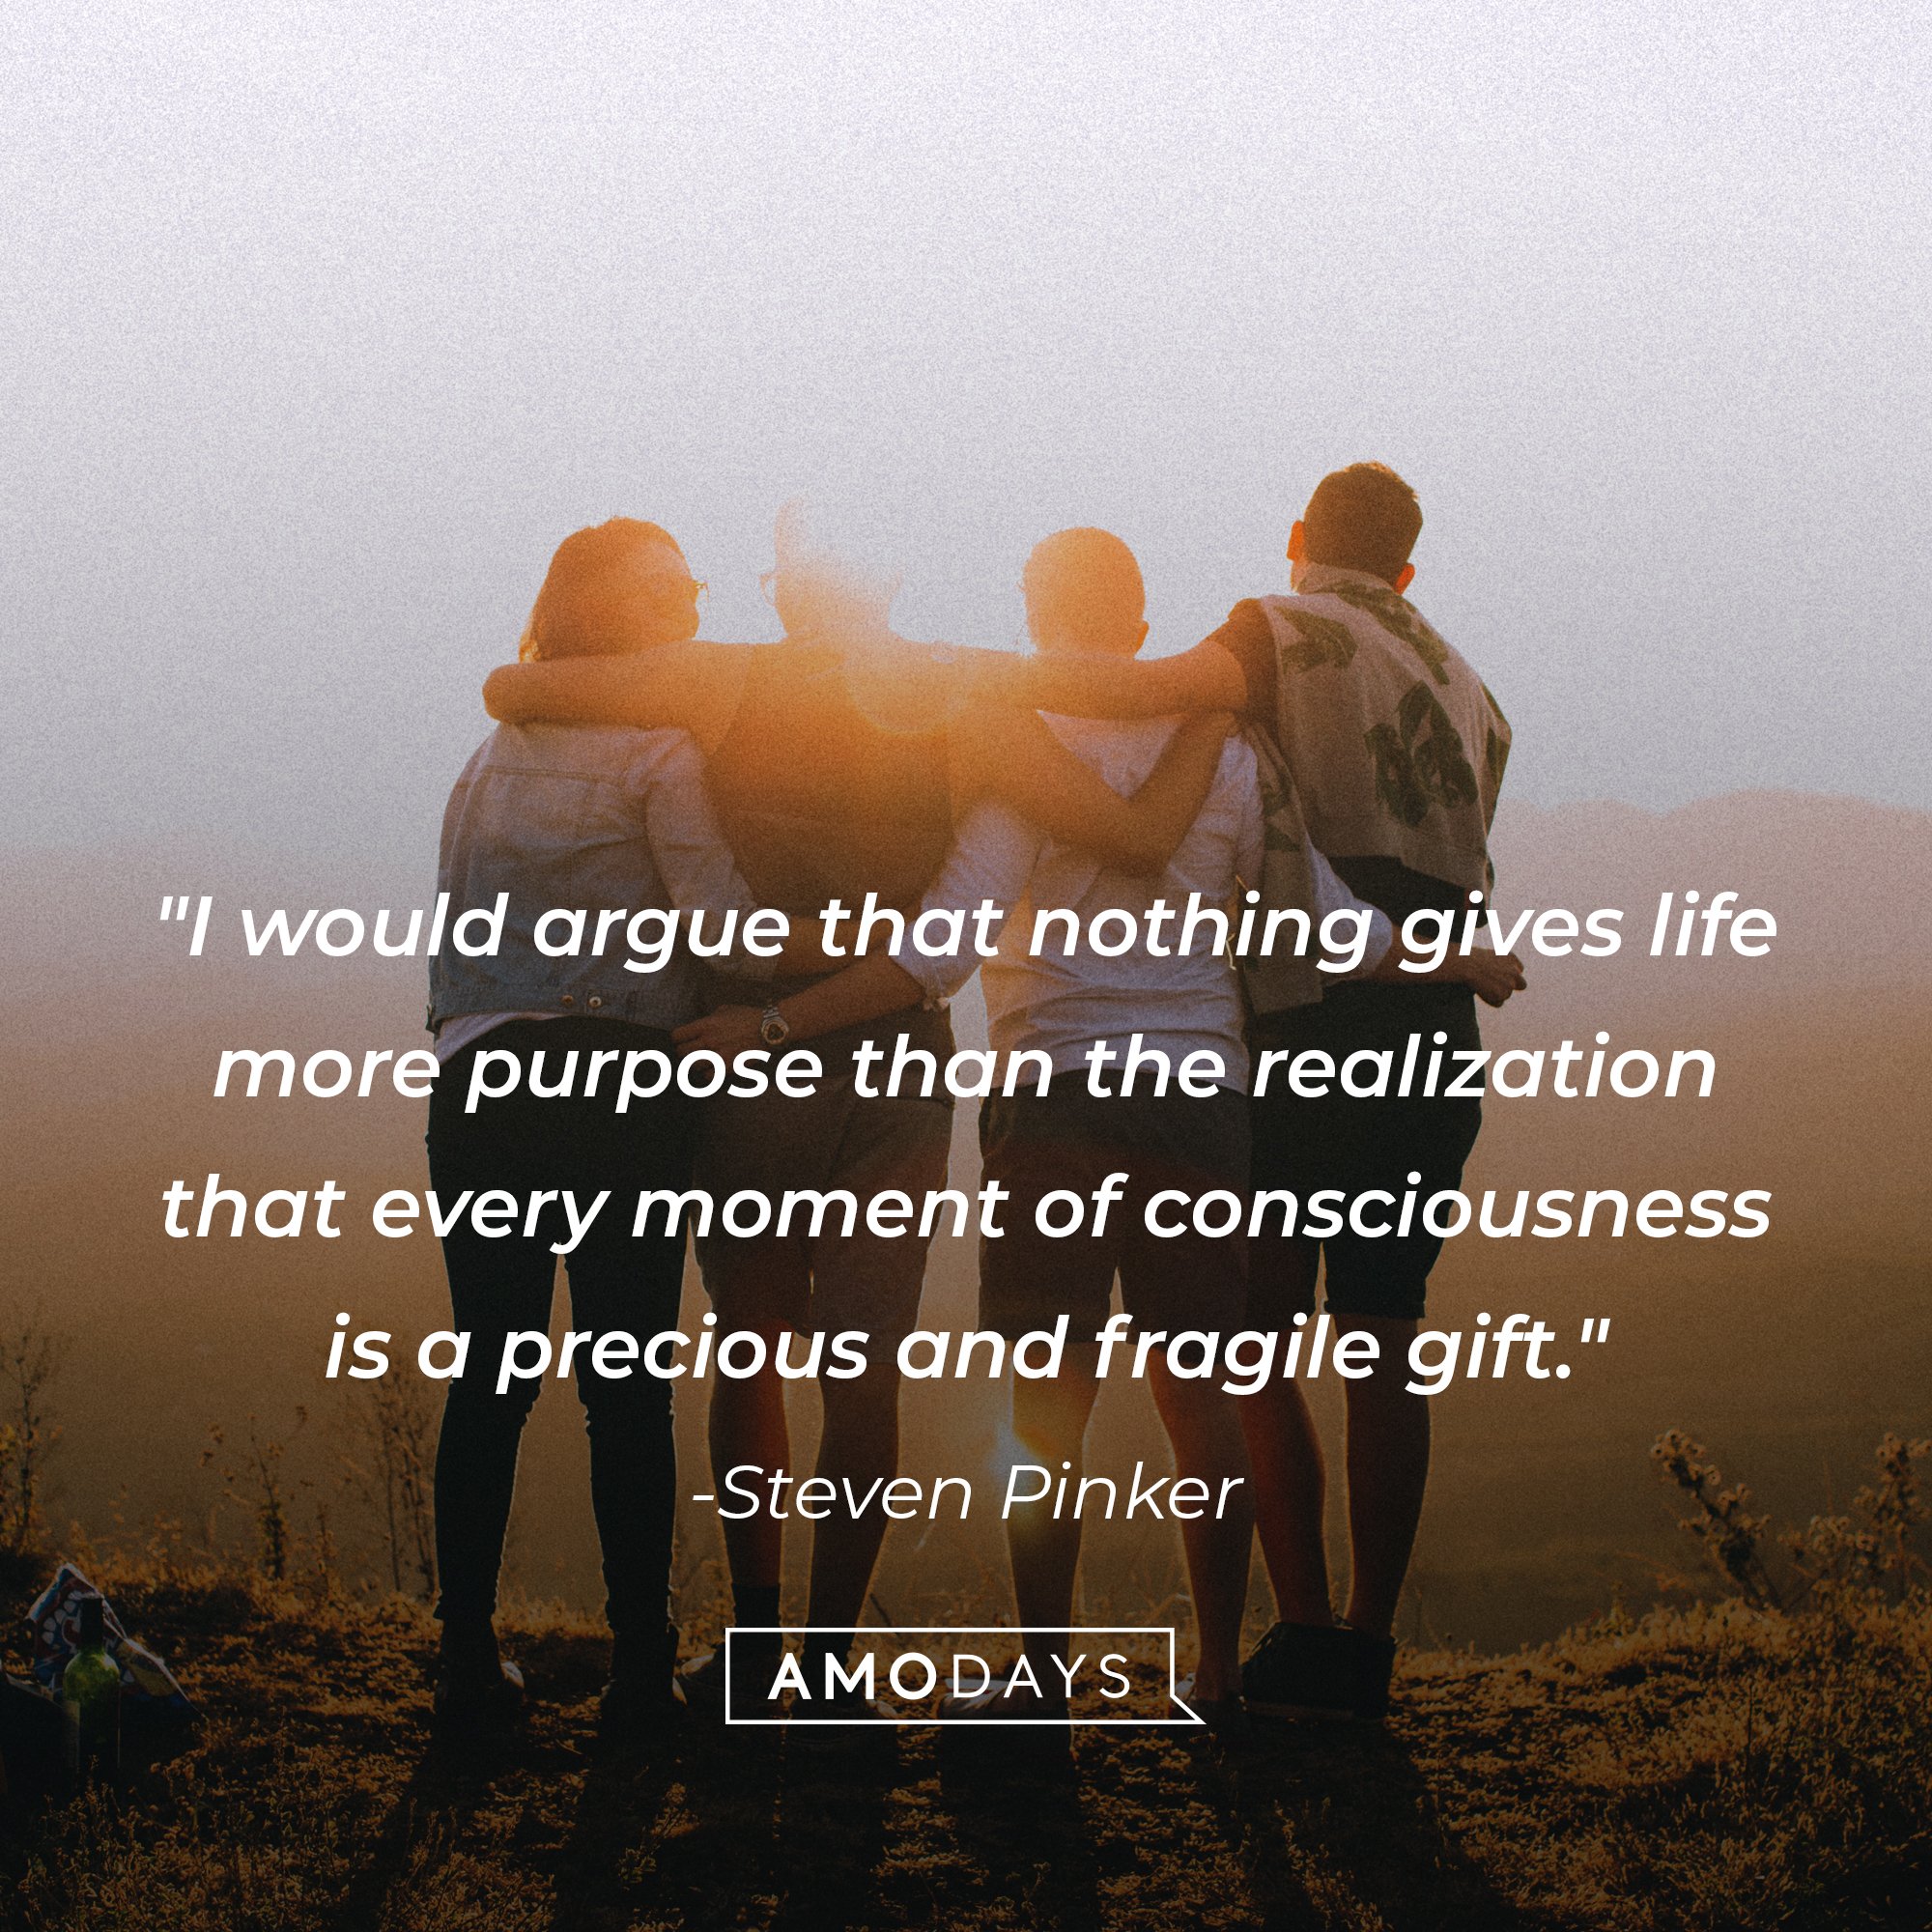 Steven Pinker’s quote: "I would argue that nothing gives life more purpose than the realization that every moment of consciousness is a precious and fragile gift." | Image: AmoDays